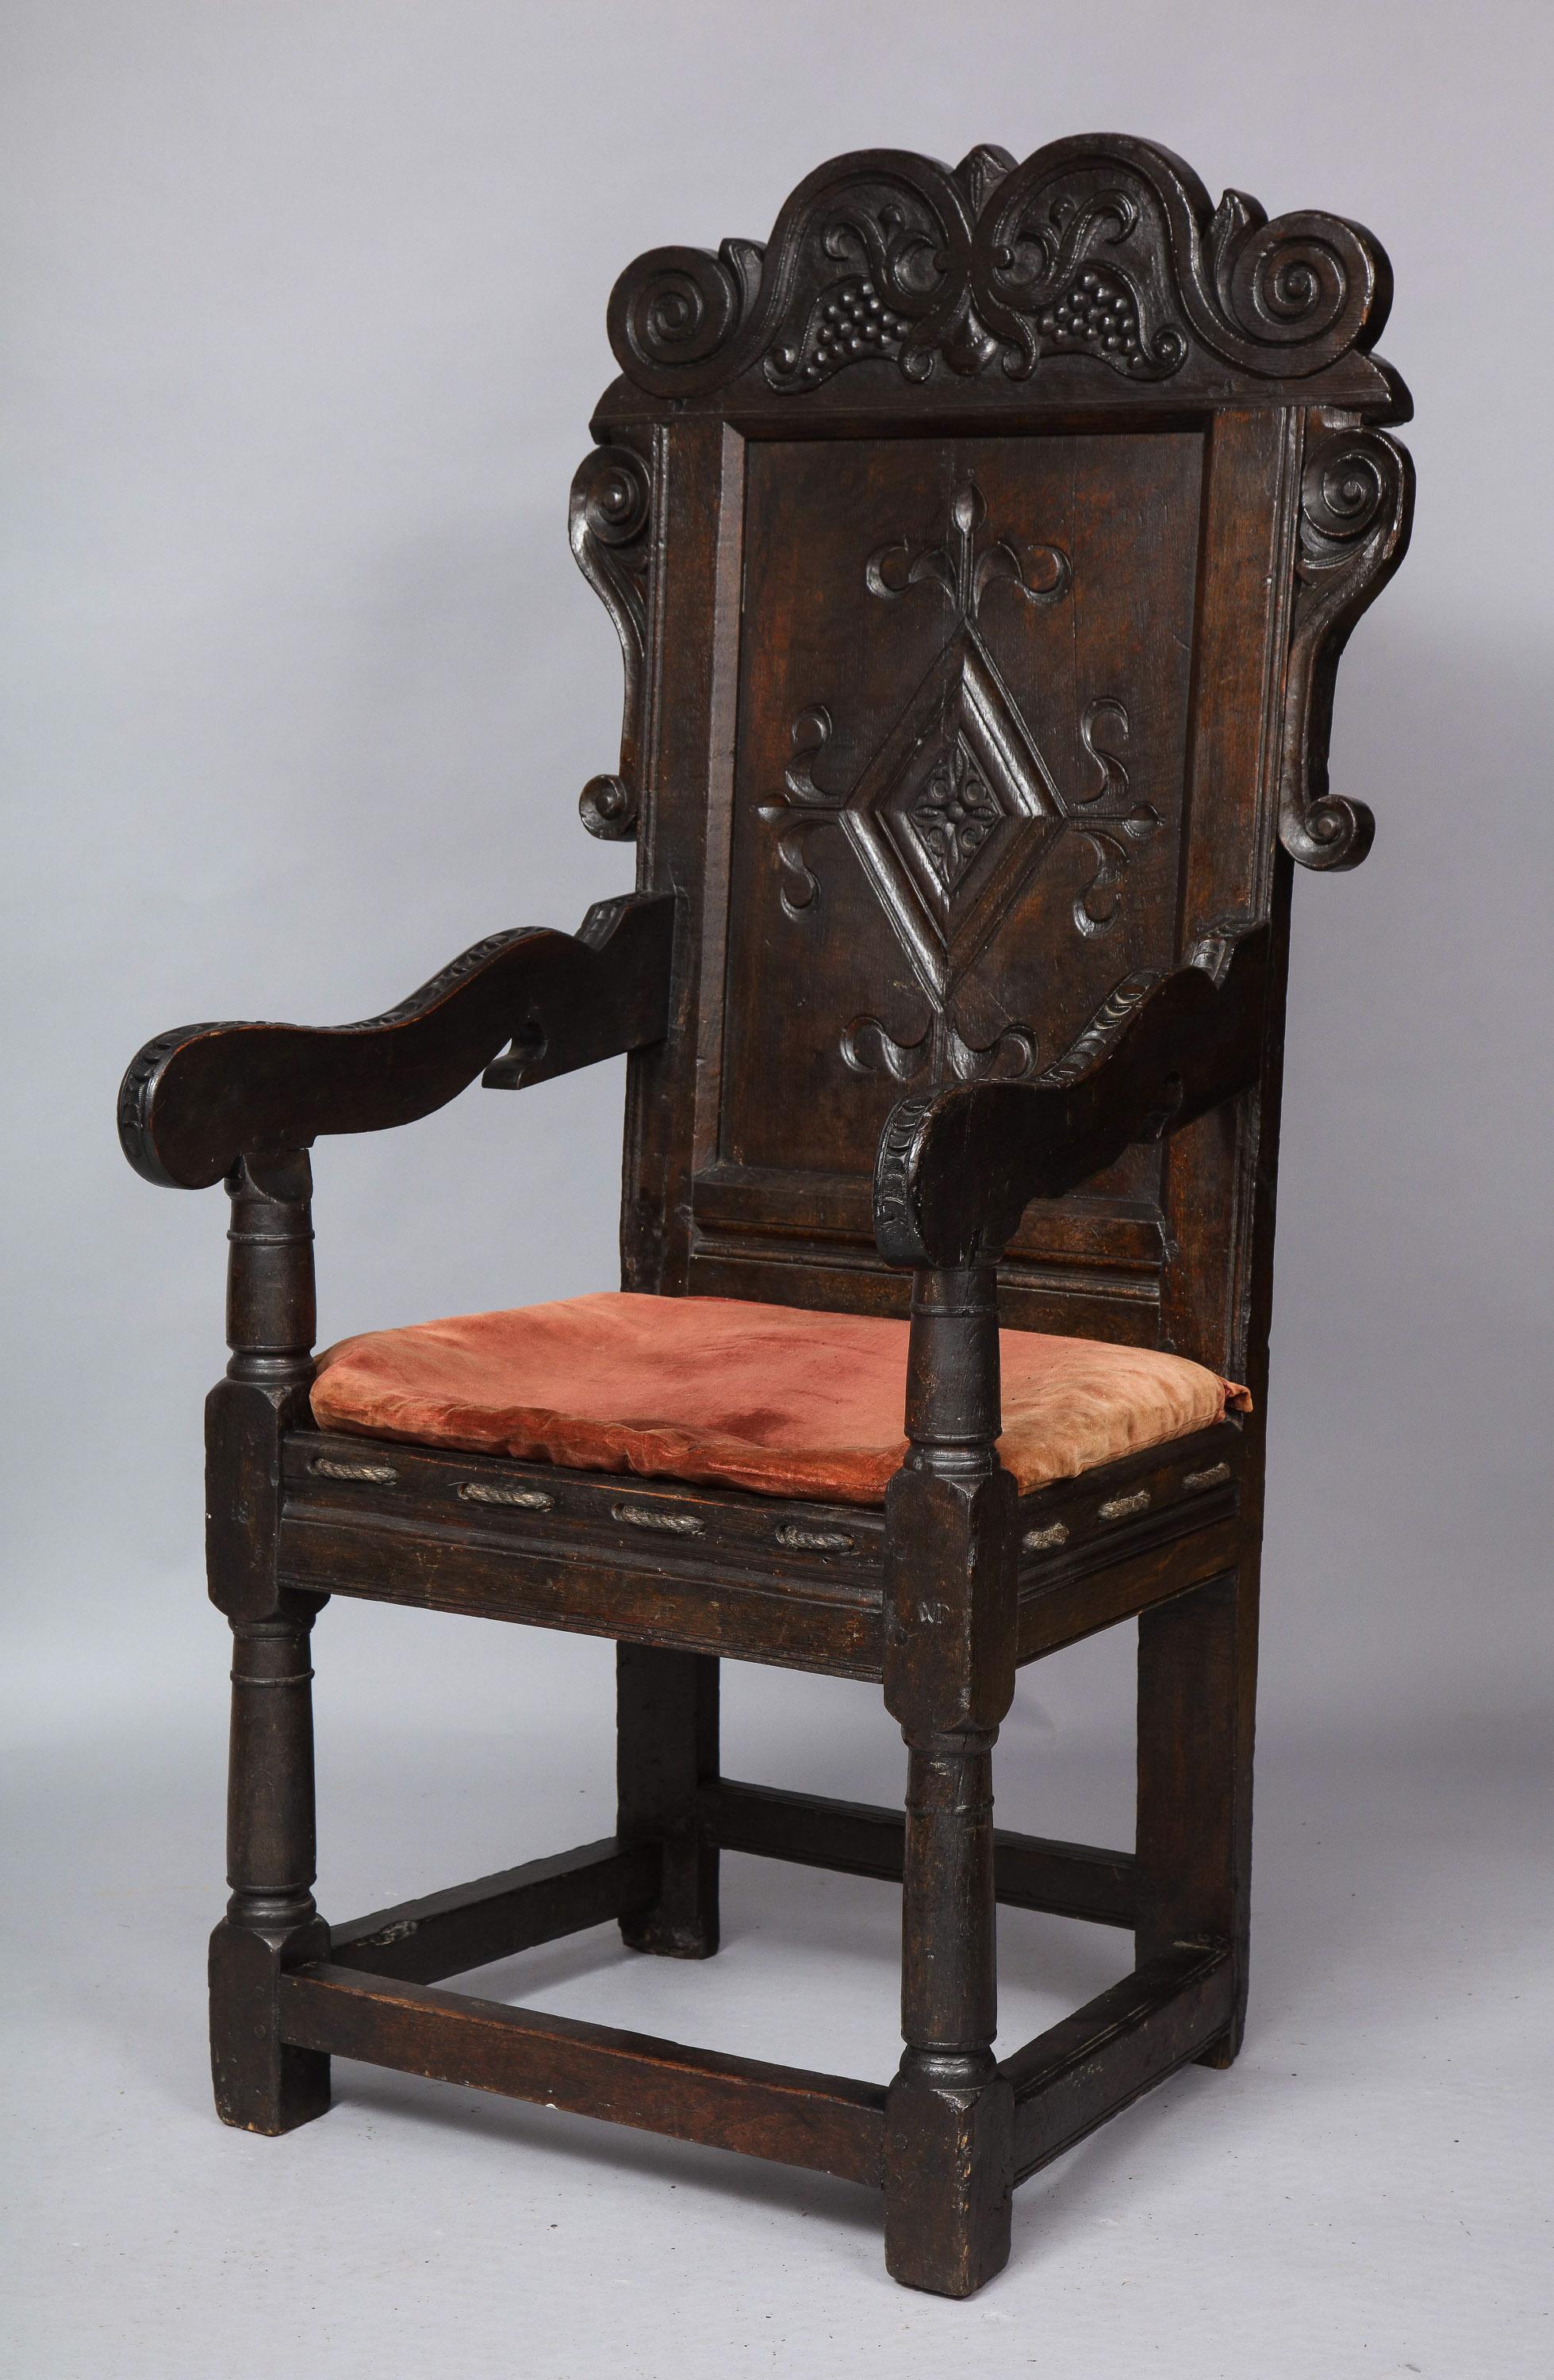 Fine English 17th century oak wainscot chair, the scroll and strapwork decorated crest with carved berries, over diamond carved back panel, the shaped arms over woven rope cushion support and standing on cannon barrel turned legs joined by box